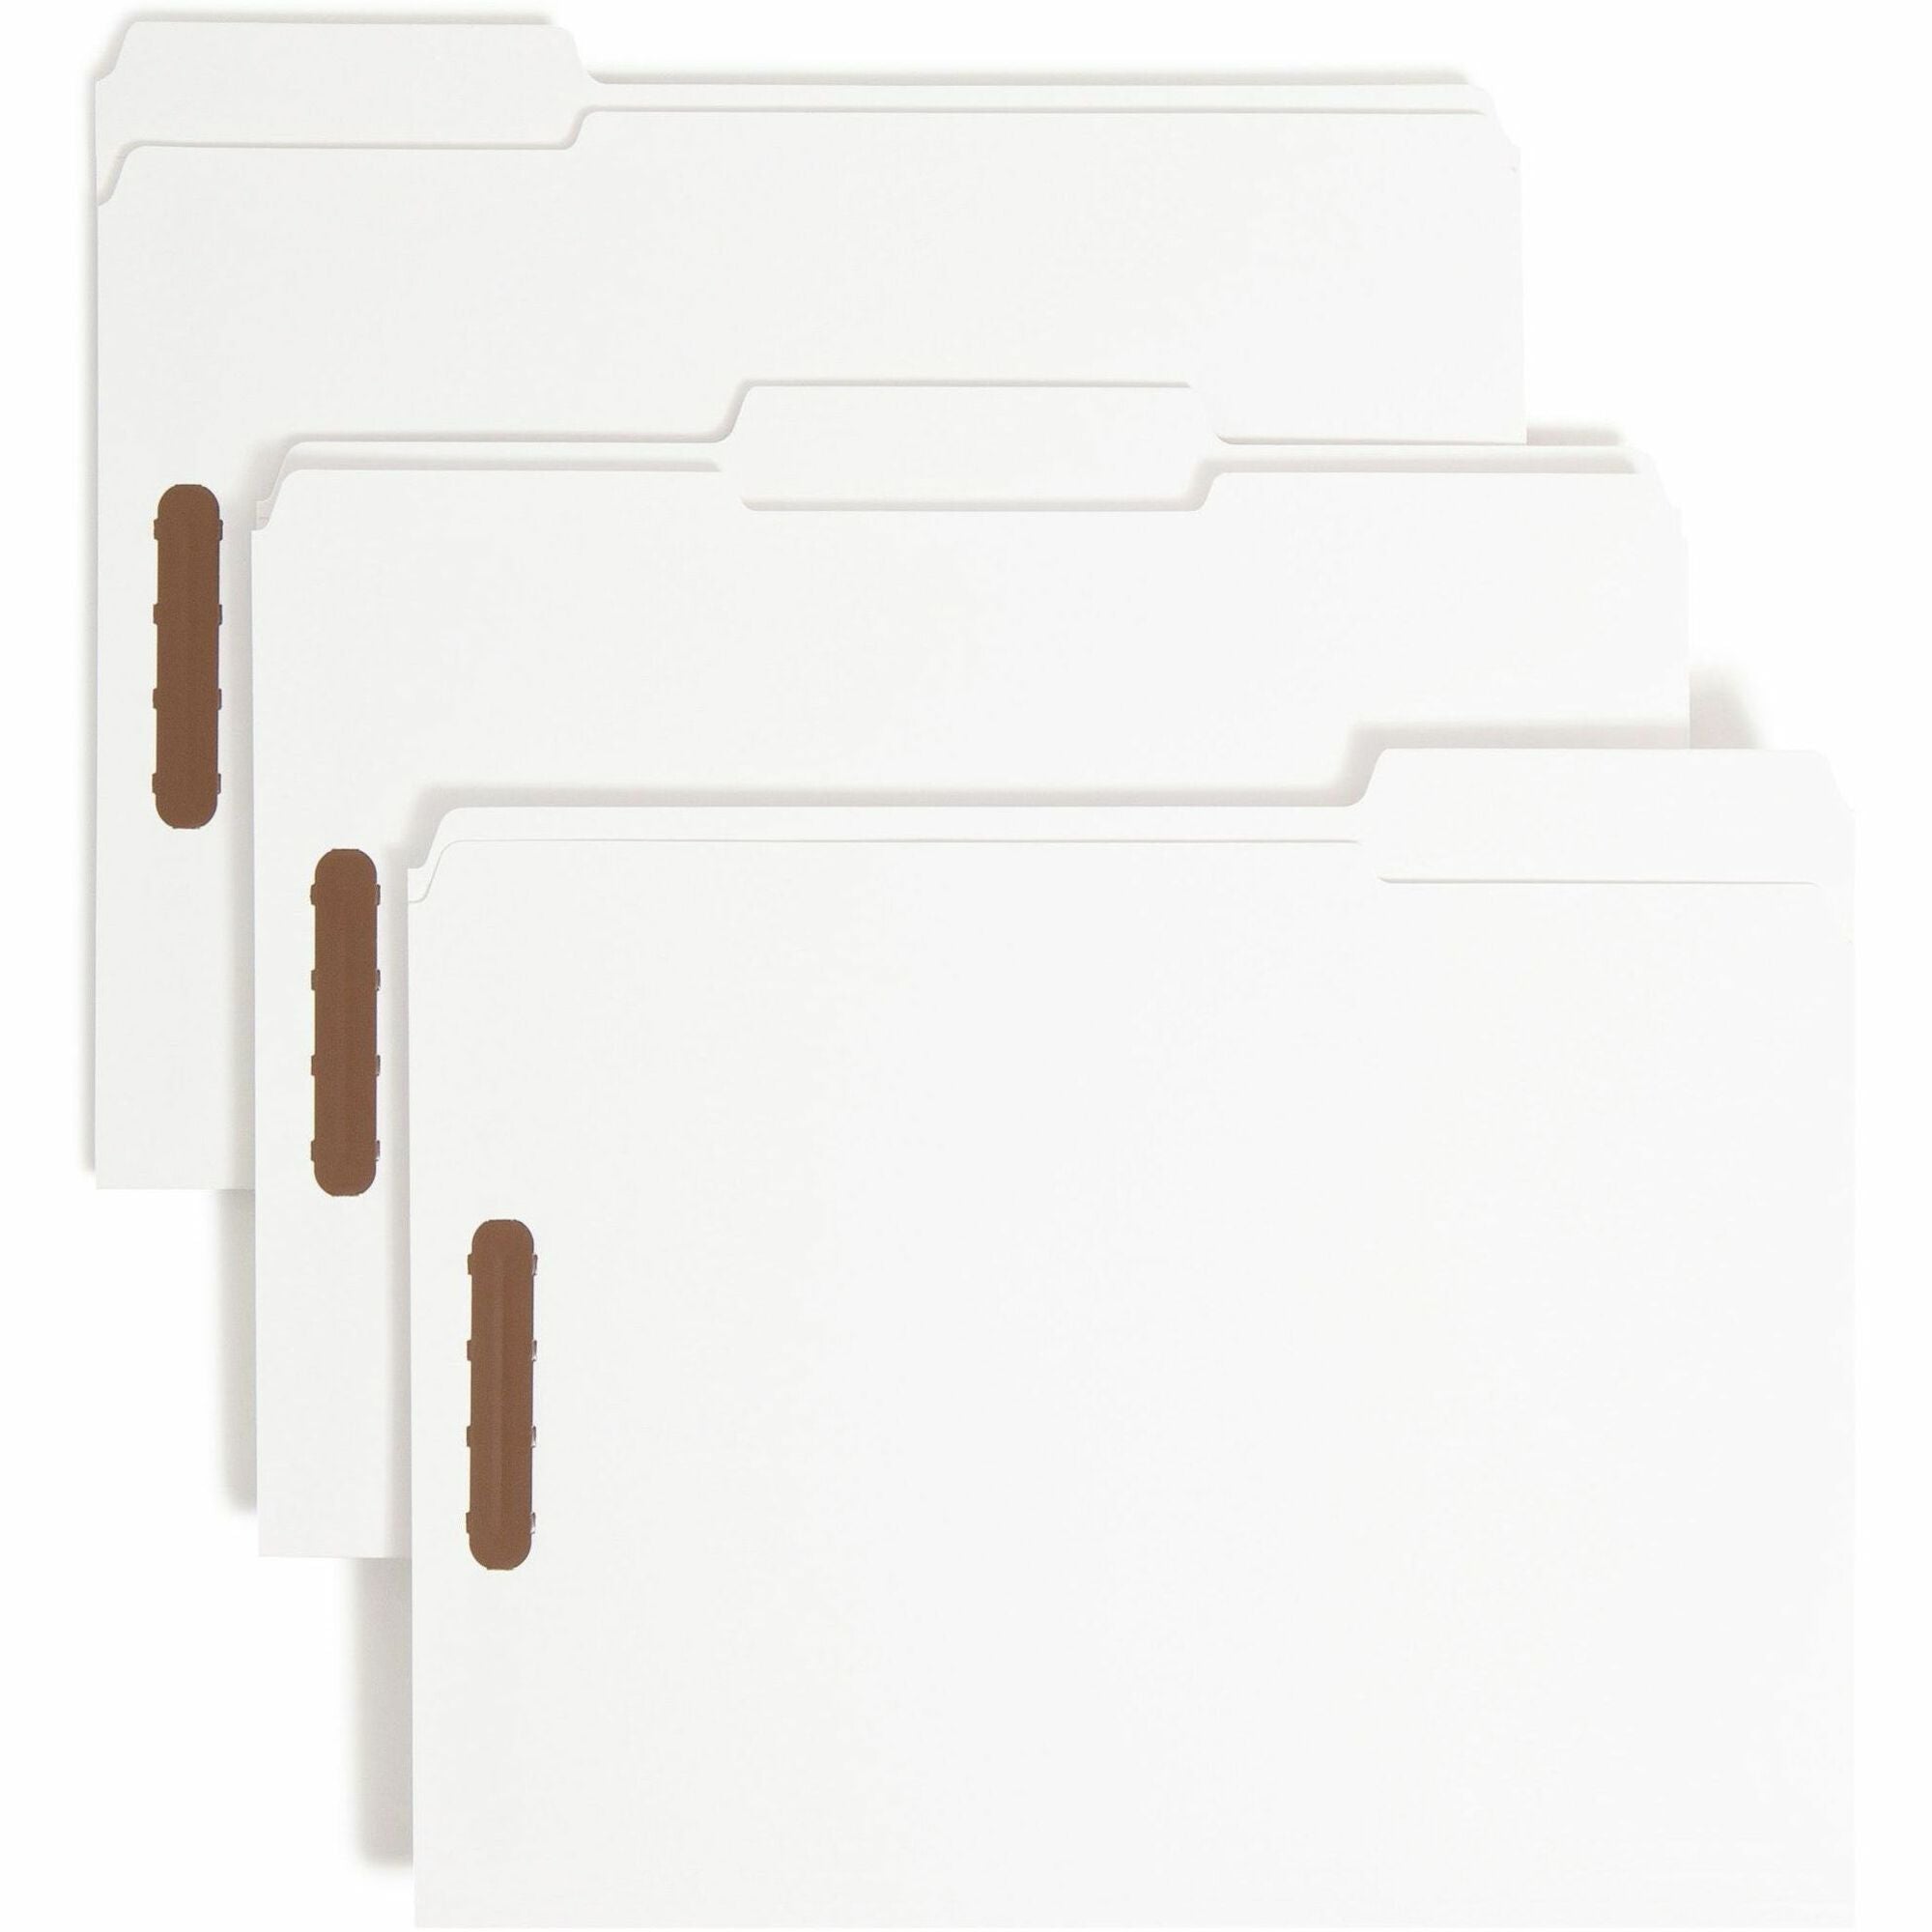 smead-1-3-tab-cut-letter-recycled-fastener-folder-8-1-2-x-11-3-4-expansion-2-x-prong-k-style-fasteners-2-fastener-capacity-assorted-position-tab-position-white-10%-recycled-50-box_smd12840 - 1